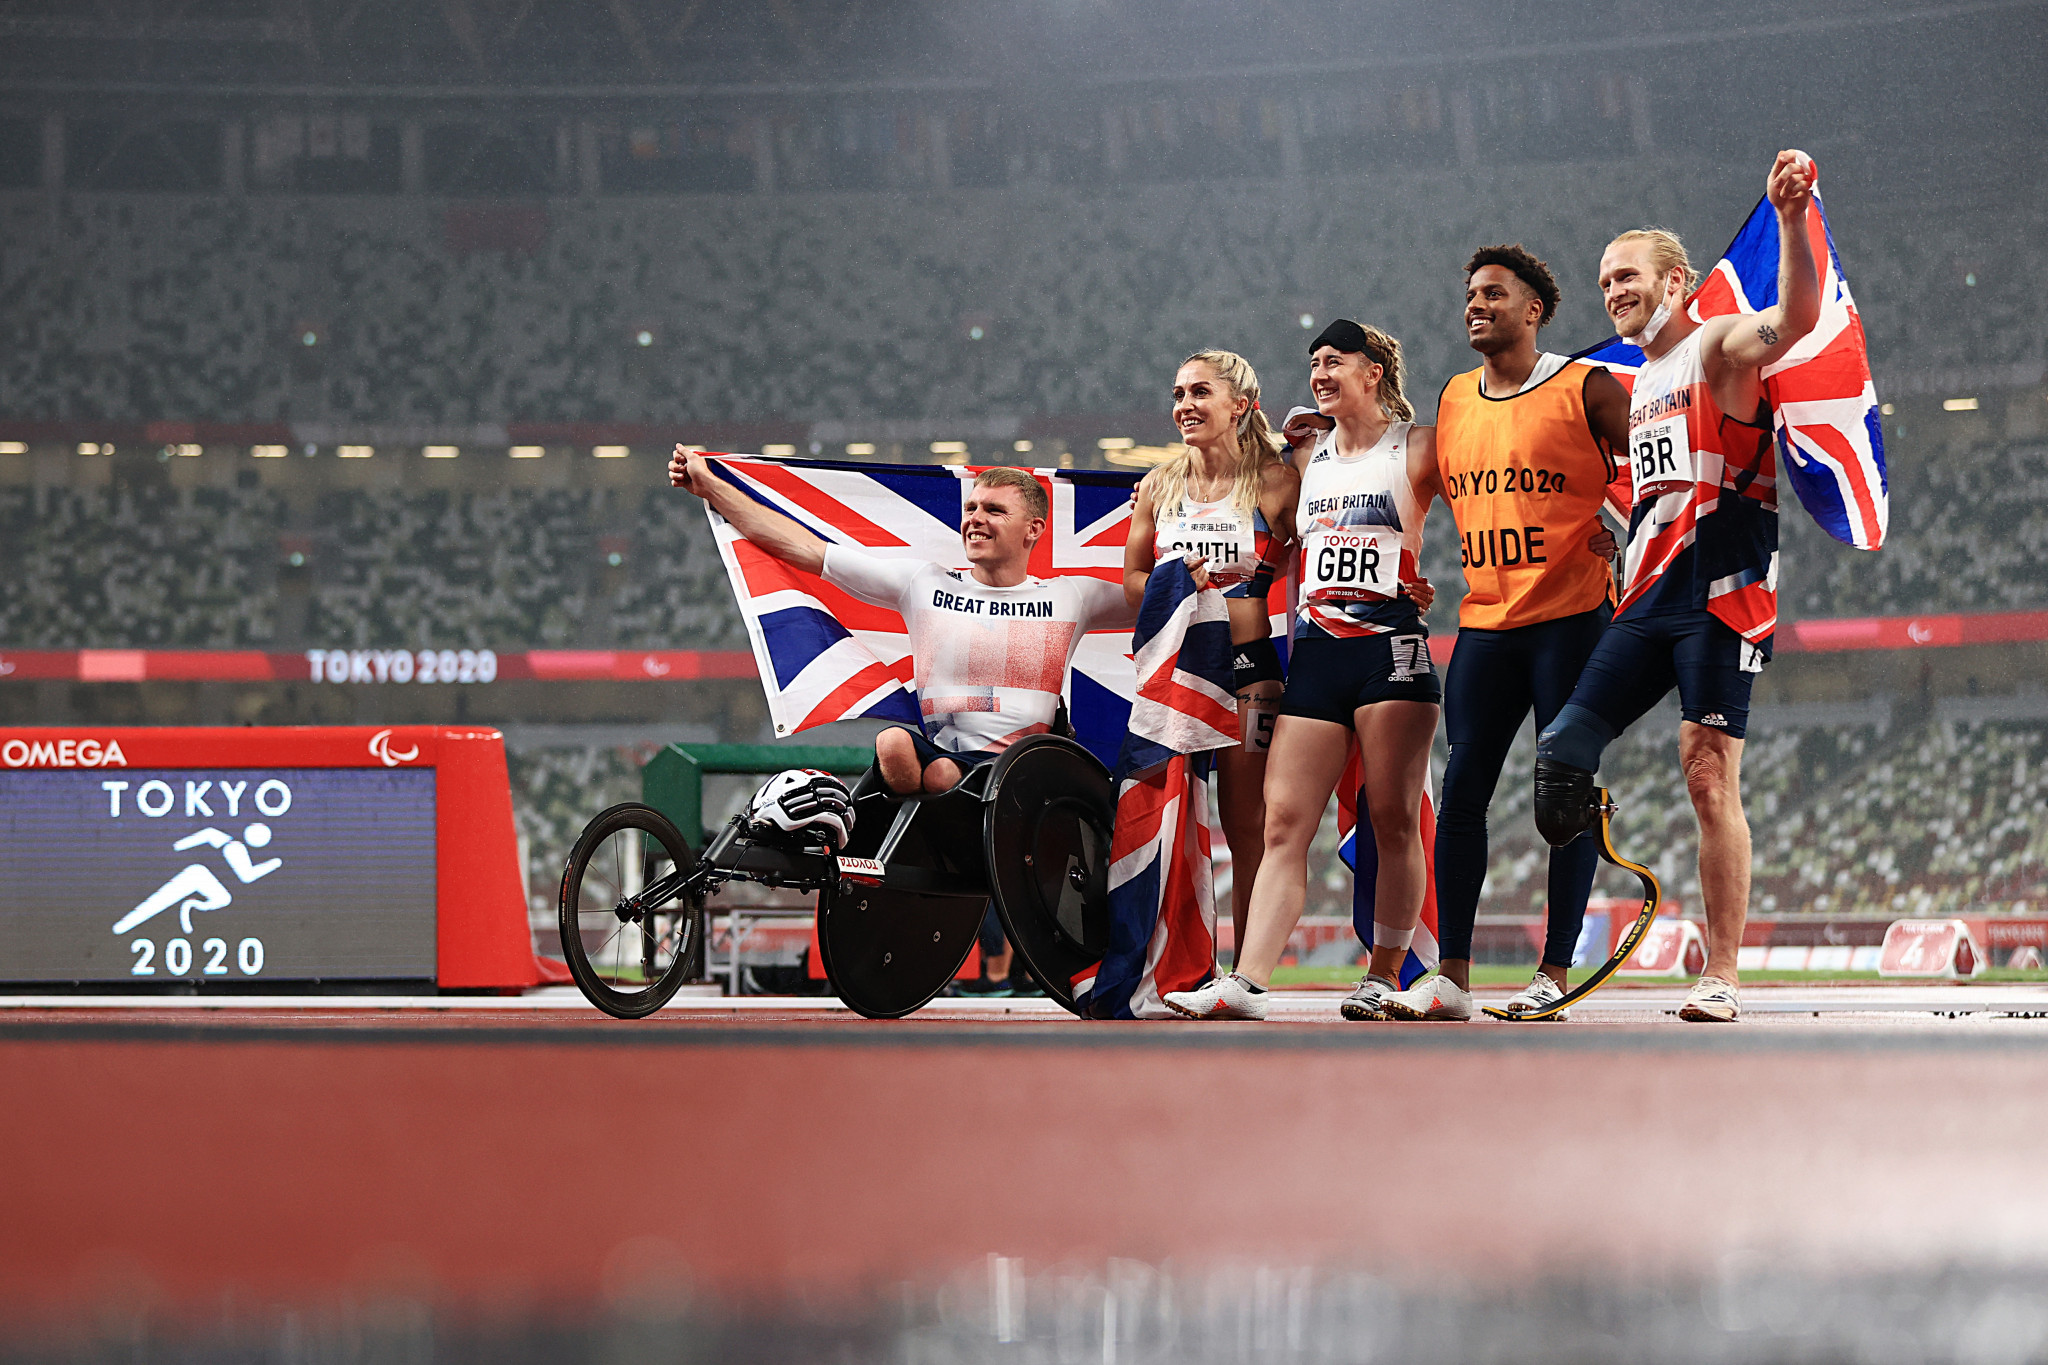 Dunn rewarded with leadership role after success with British Para athletics team